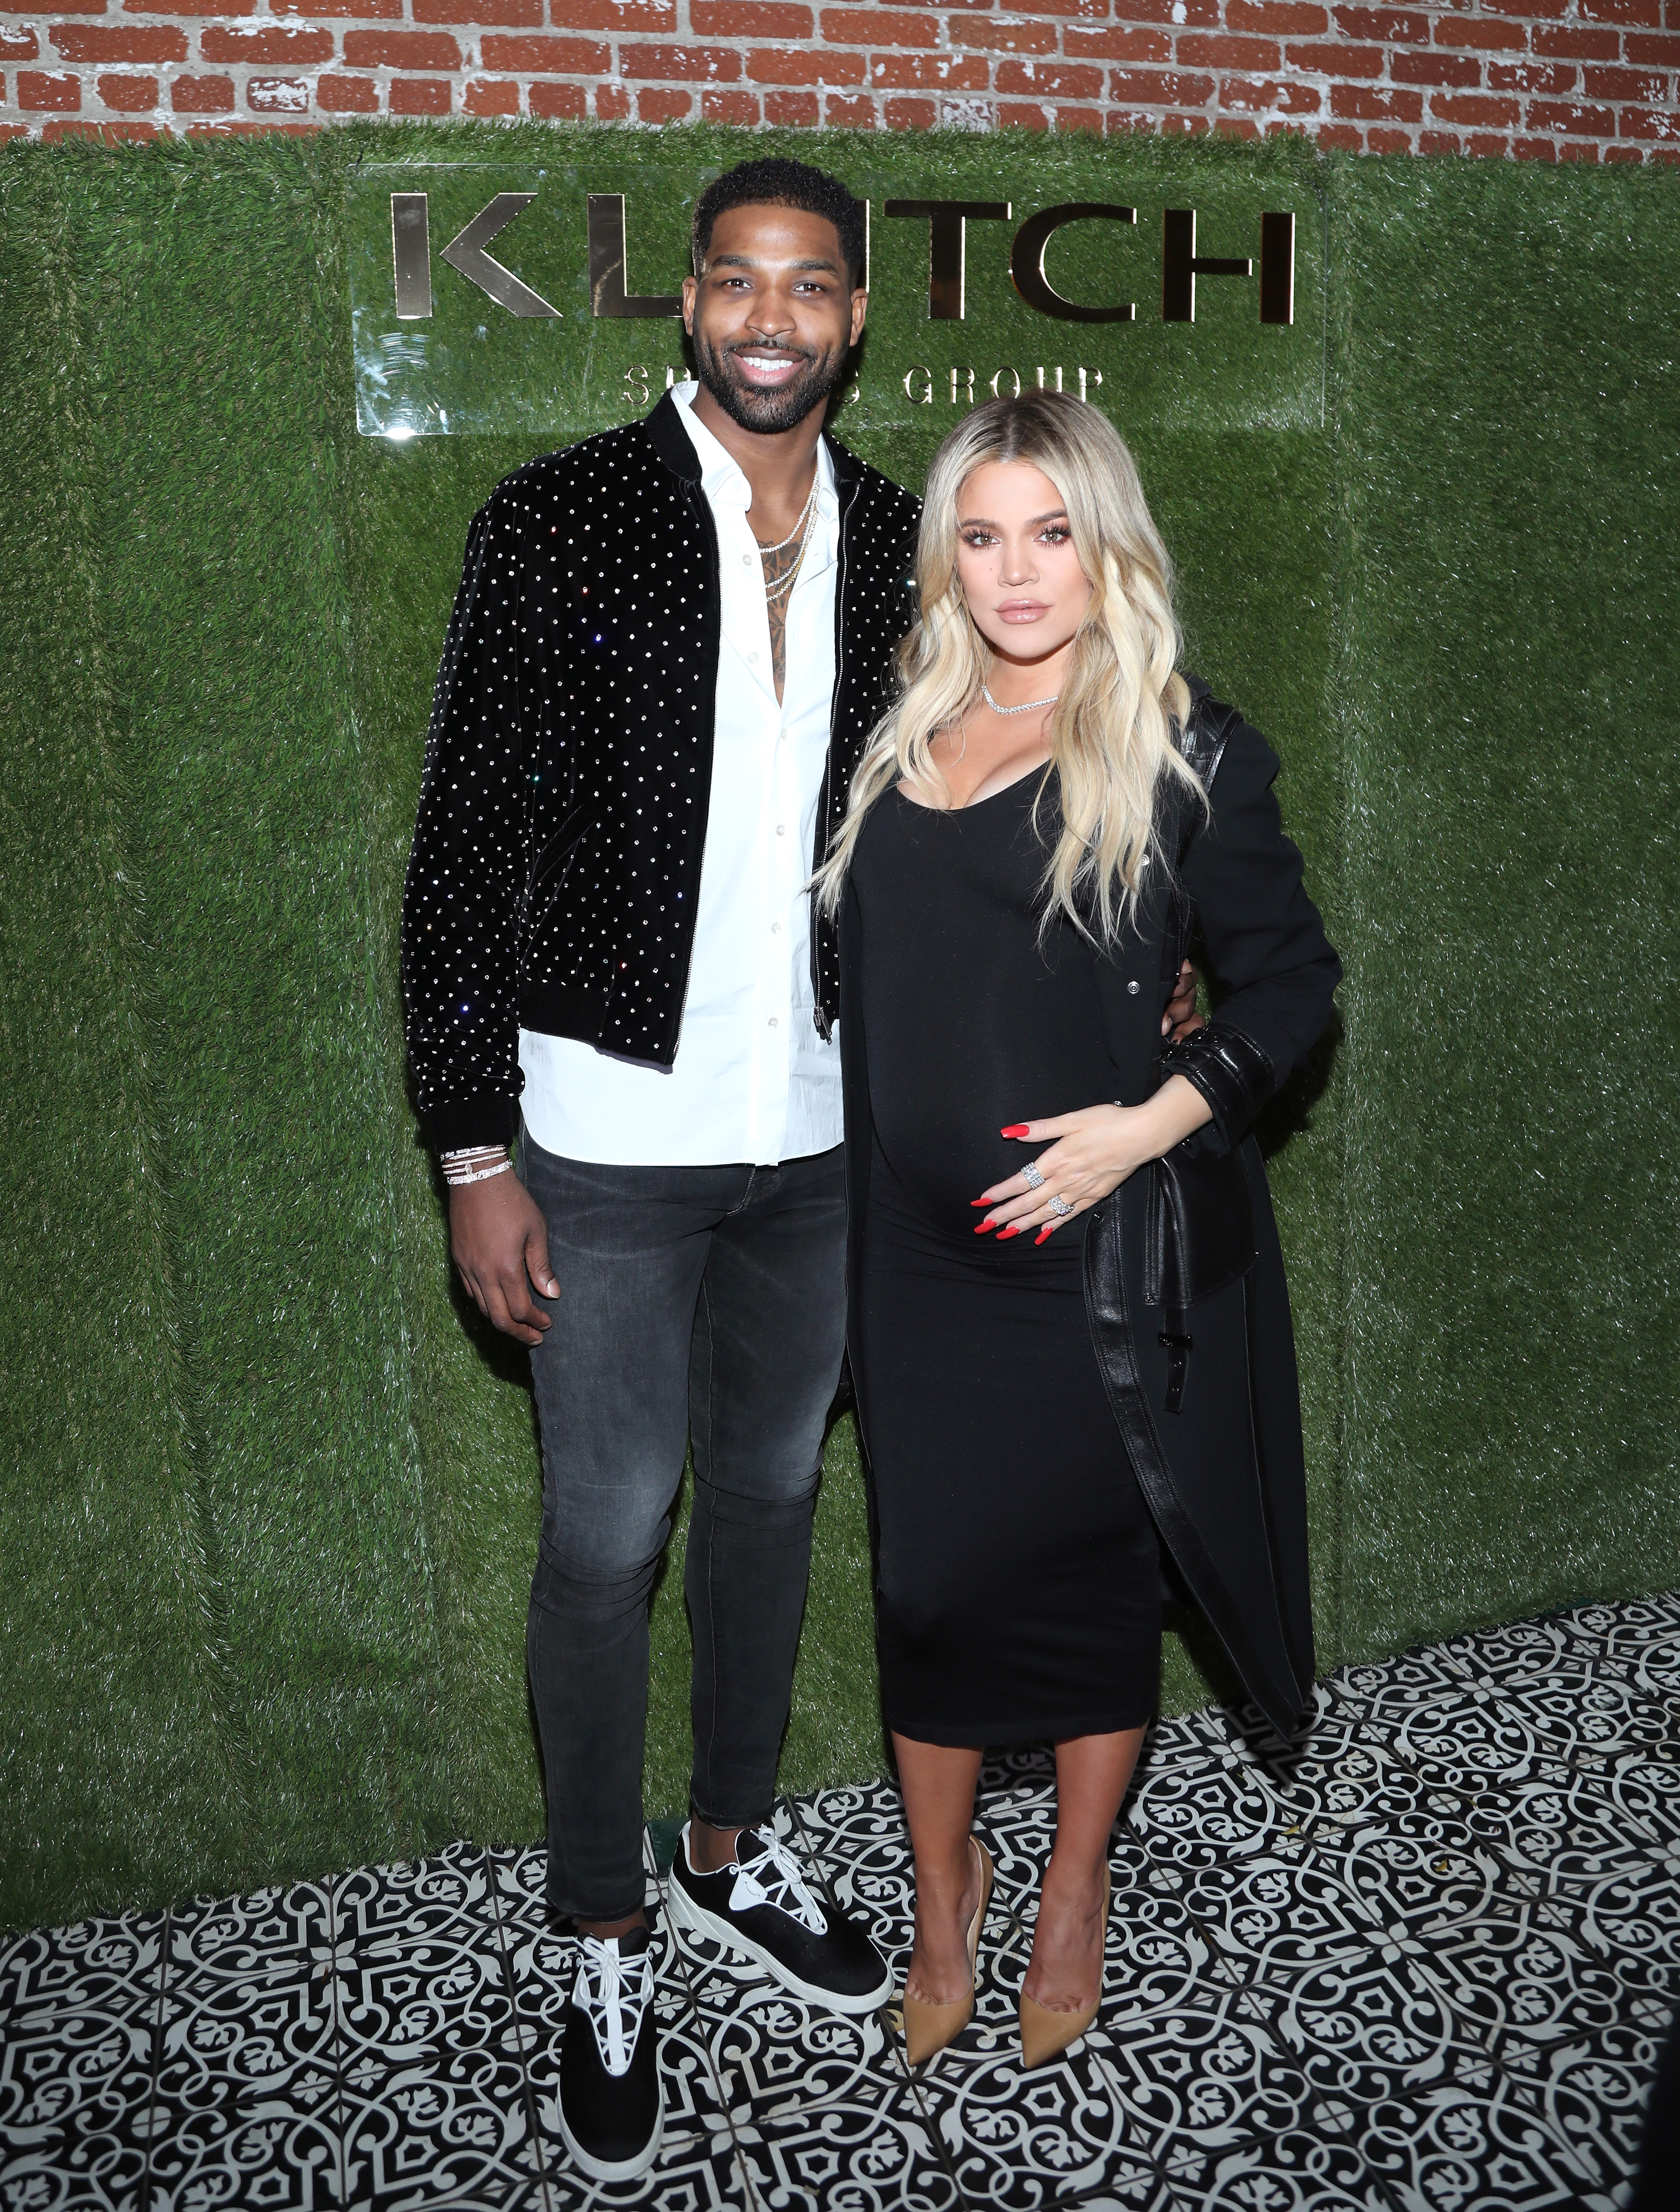 Tristan Thompson and Khloe Kardashian broke up after news of her pregnancy